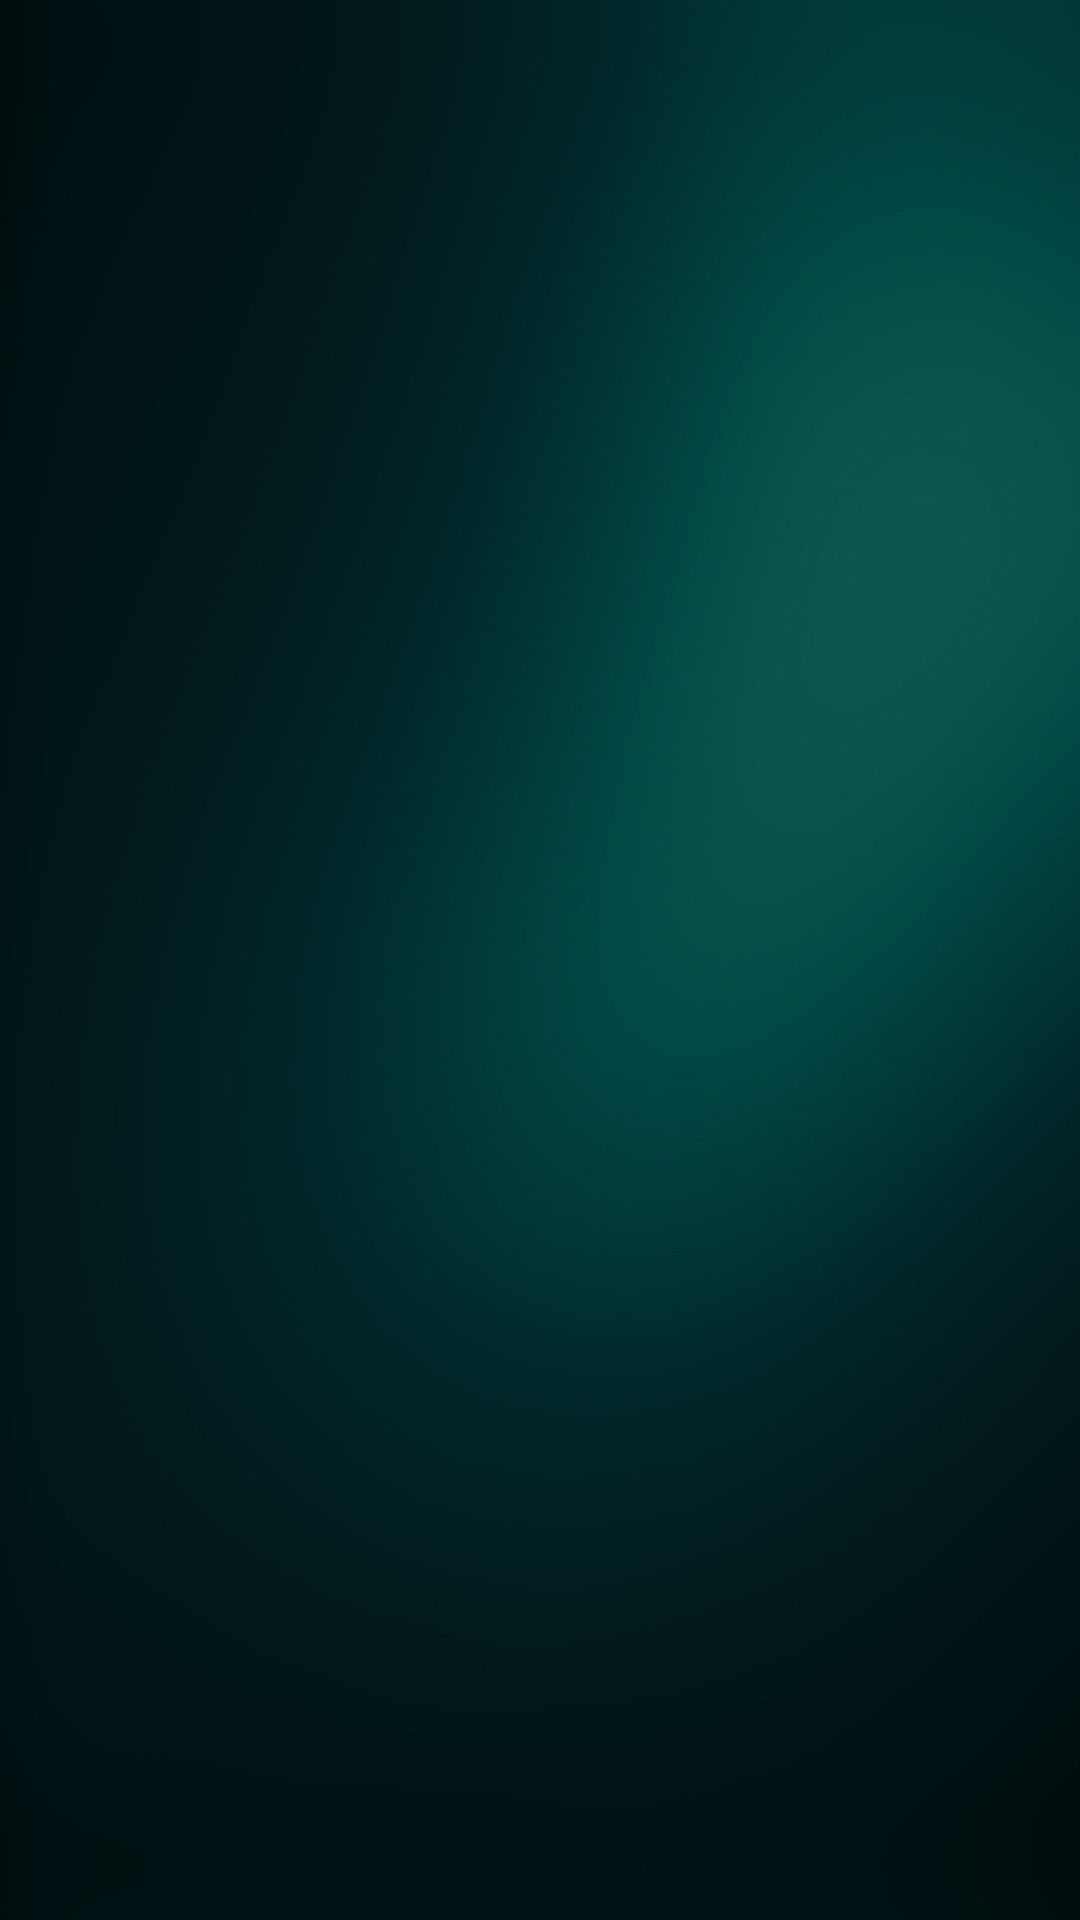 Black and Teal Wallpaper Free Black and Teal Background